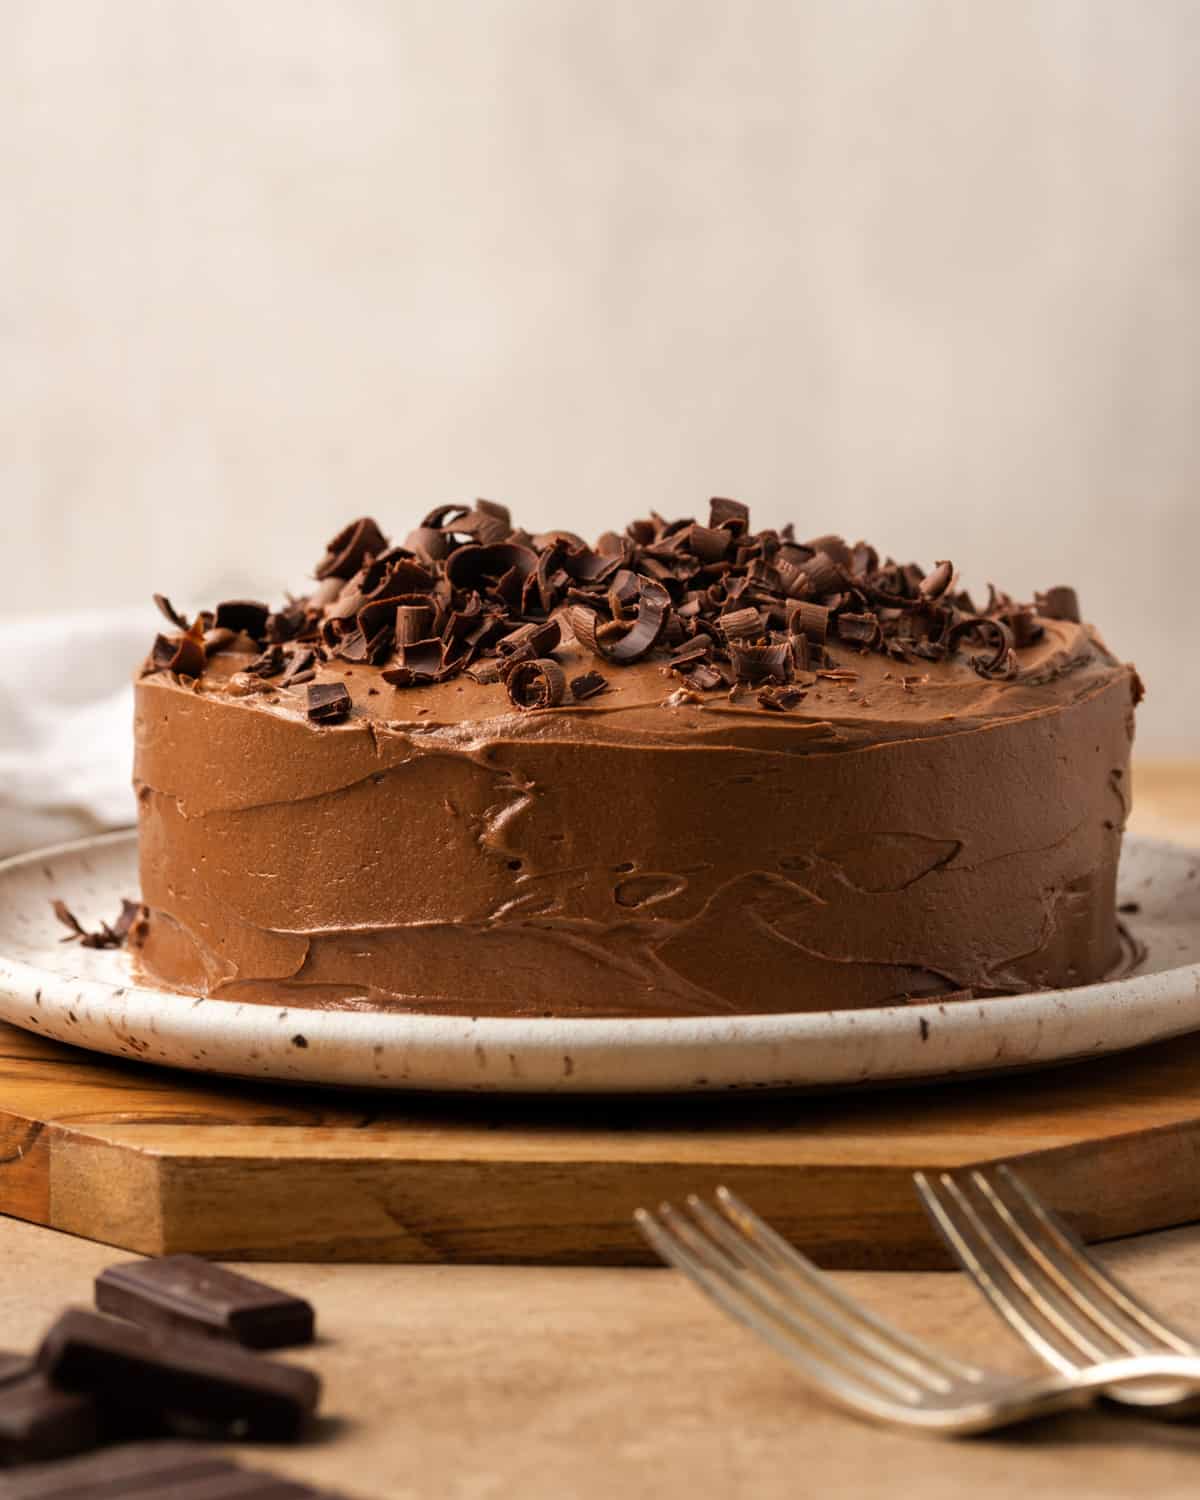 A small chocolate cake covered with chocolate frosting and chocolate curls.